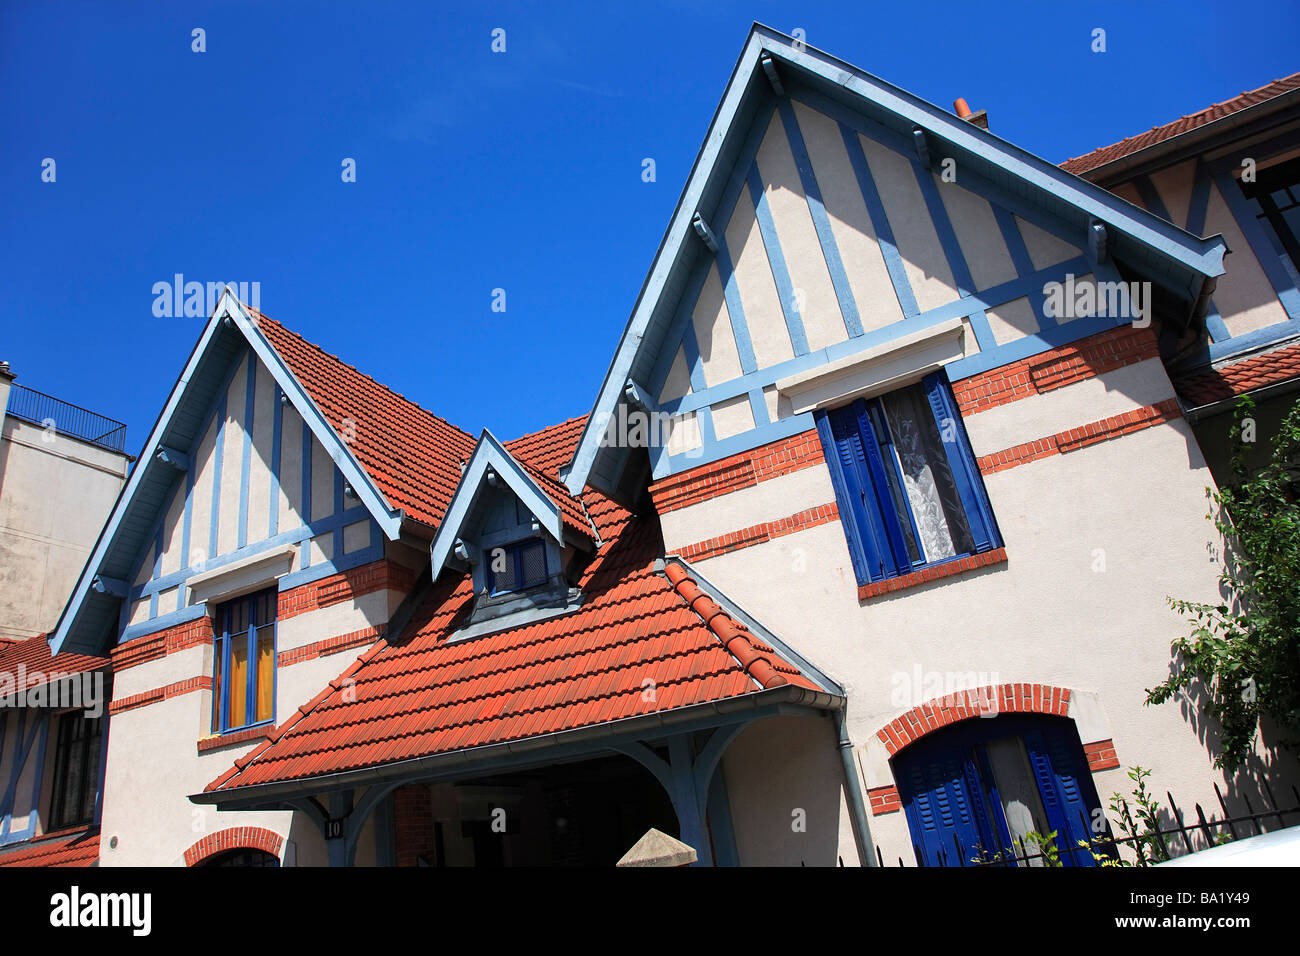 ONE THE NICEST HLM NAMED THE PETITE ALSACE IN PARIS Stock Photo